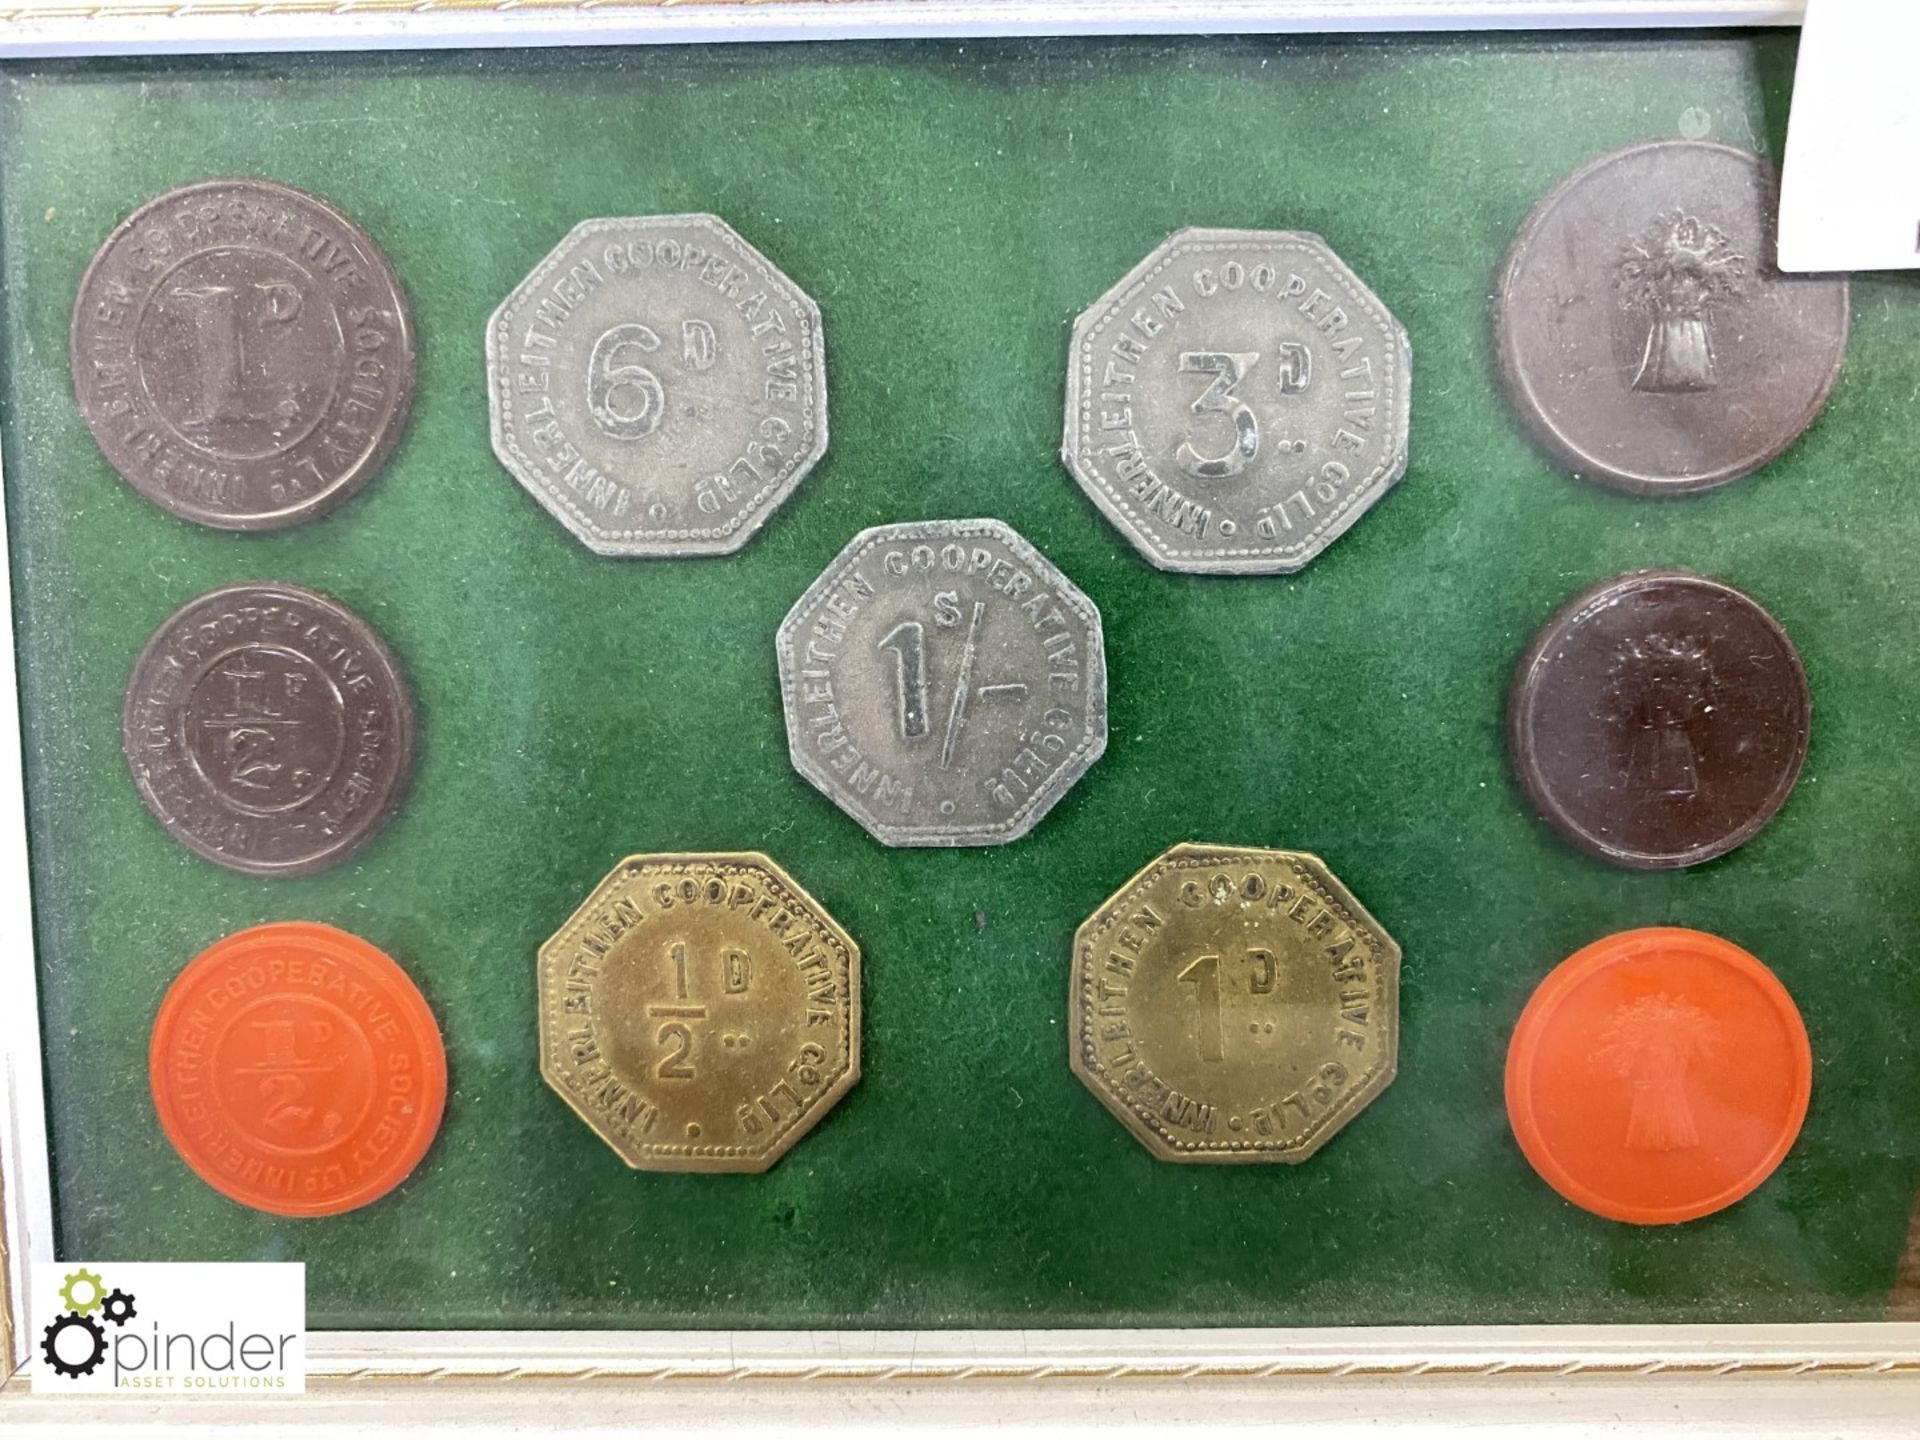 Framed and glazed Presentation of Co-Operative Society Coins - Image 2 of 4